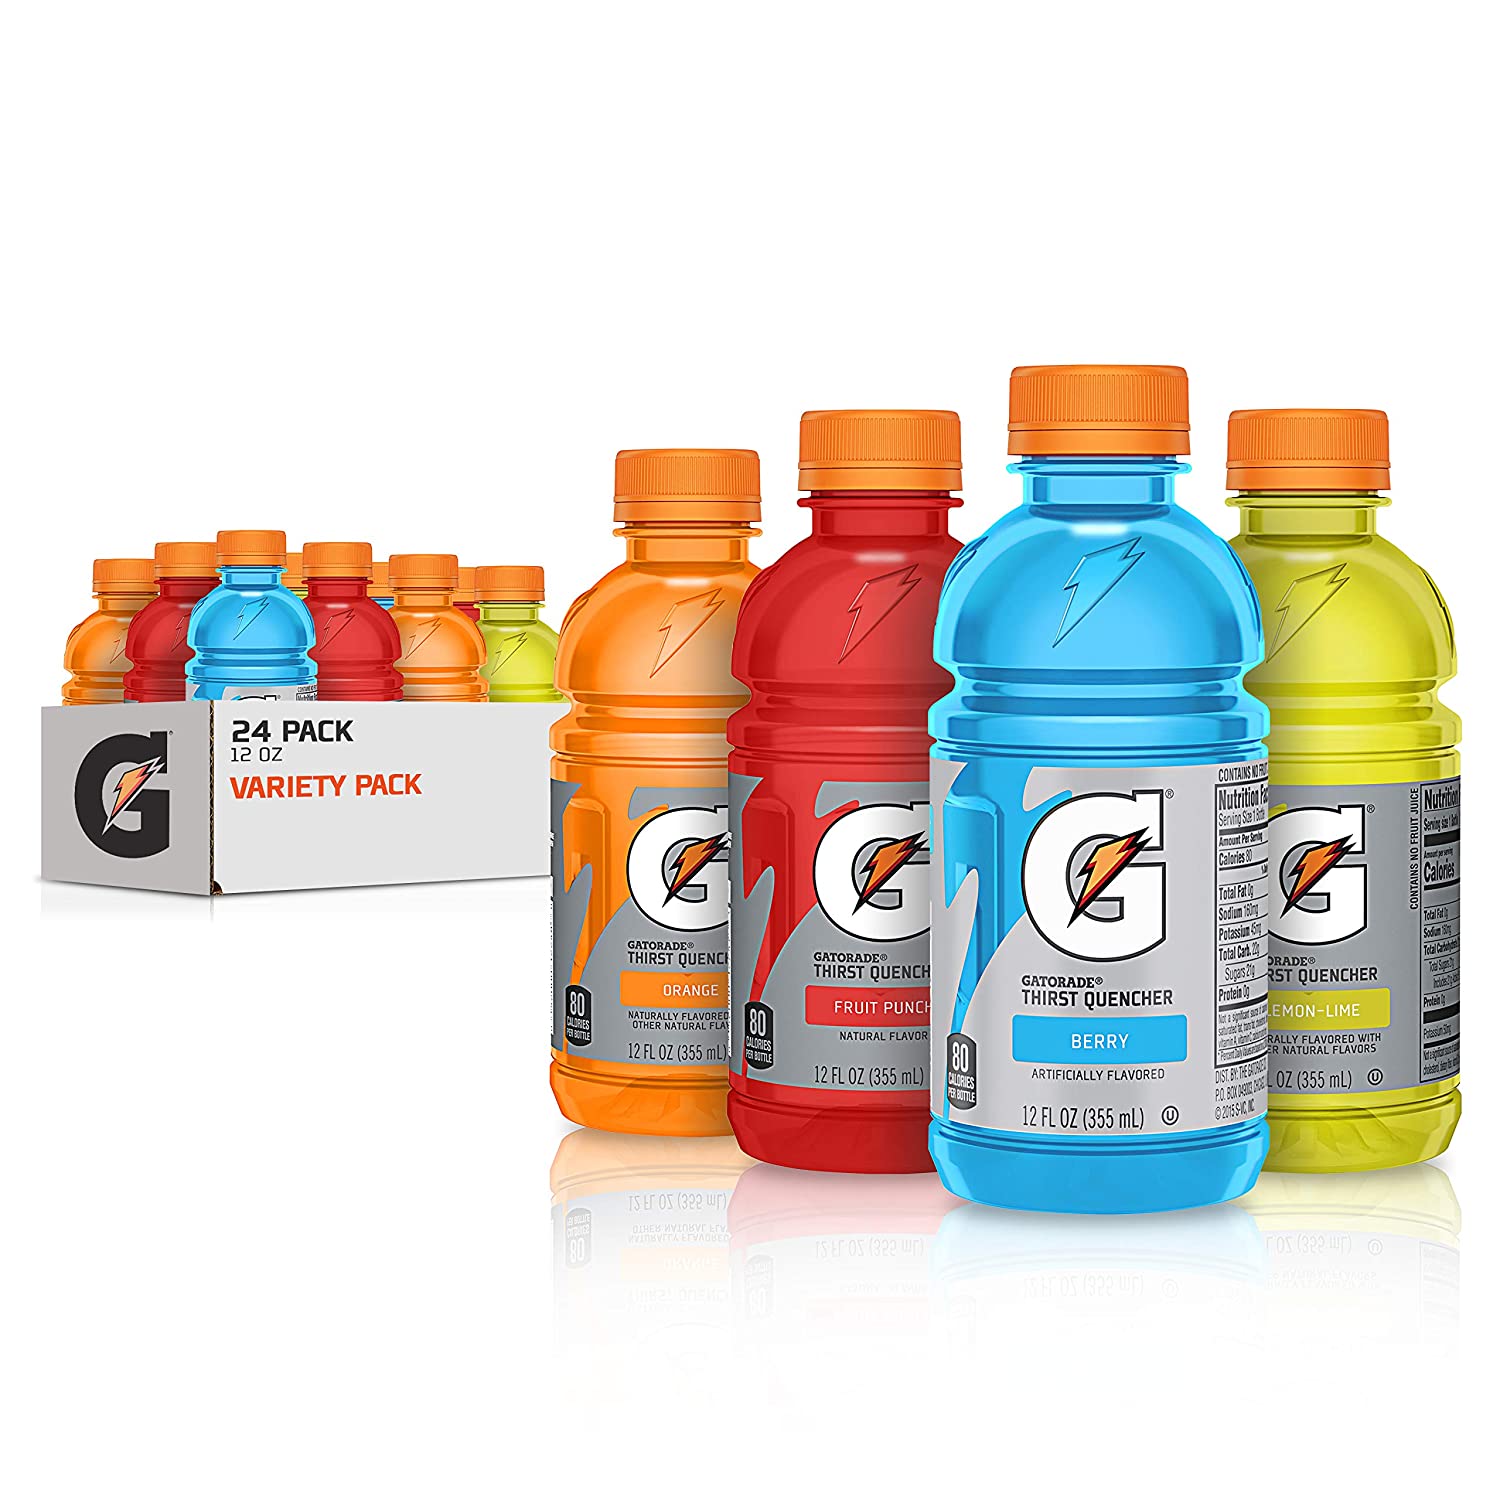 24-Pack 12-Oz Gatorade Classic Thirst Quencher (Variety Pack) $12.20 w/ S&S + Free S&H w/ Prime or $25+